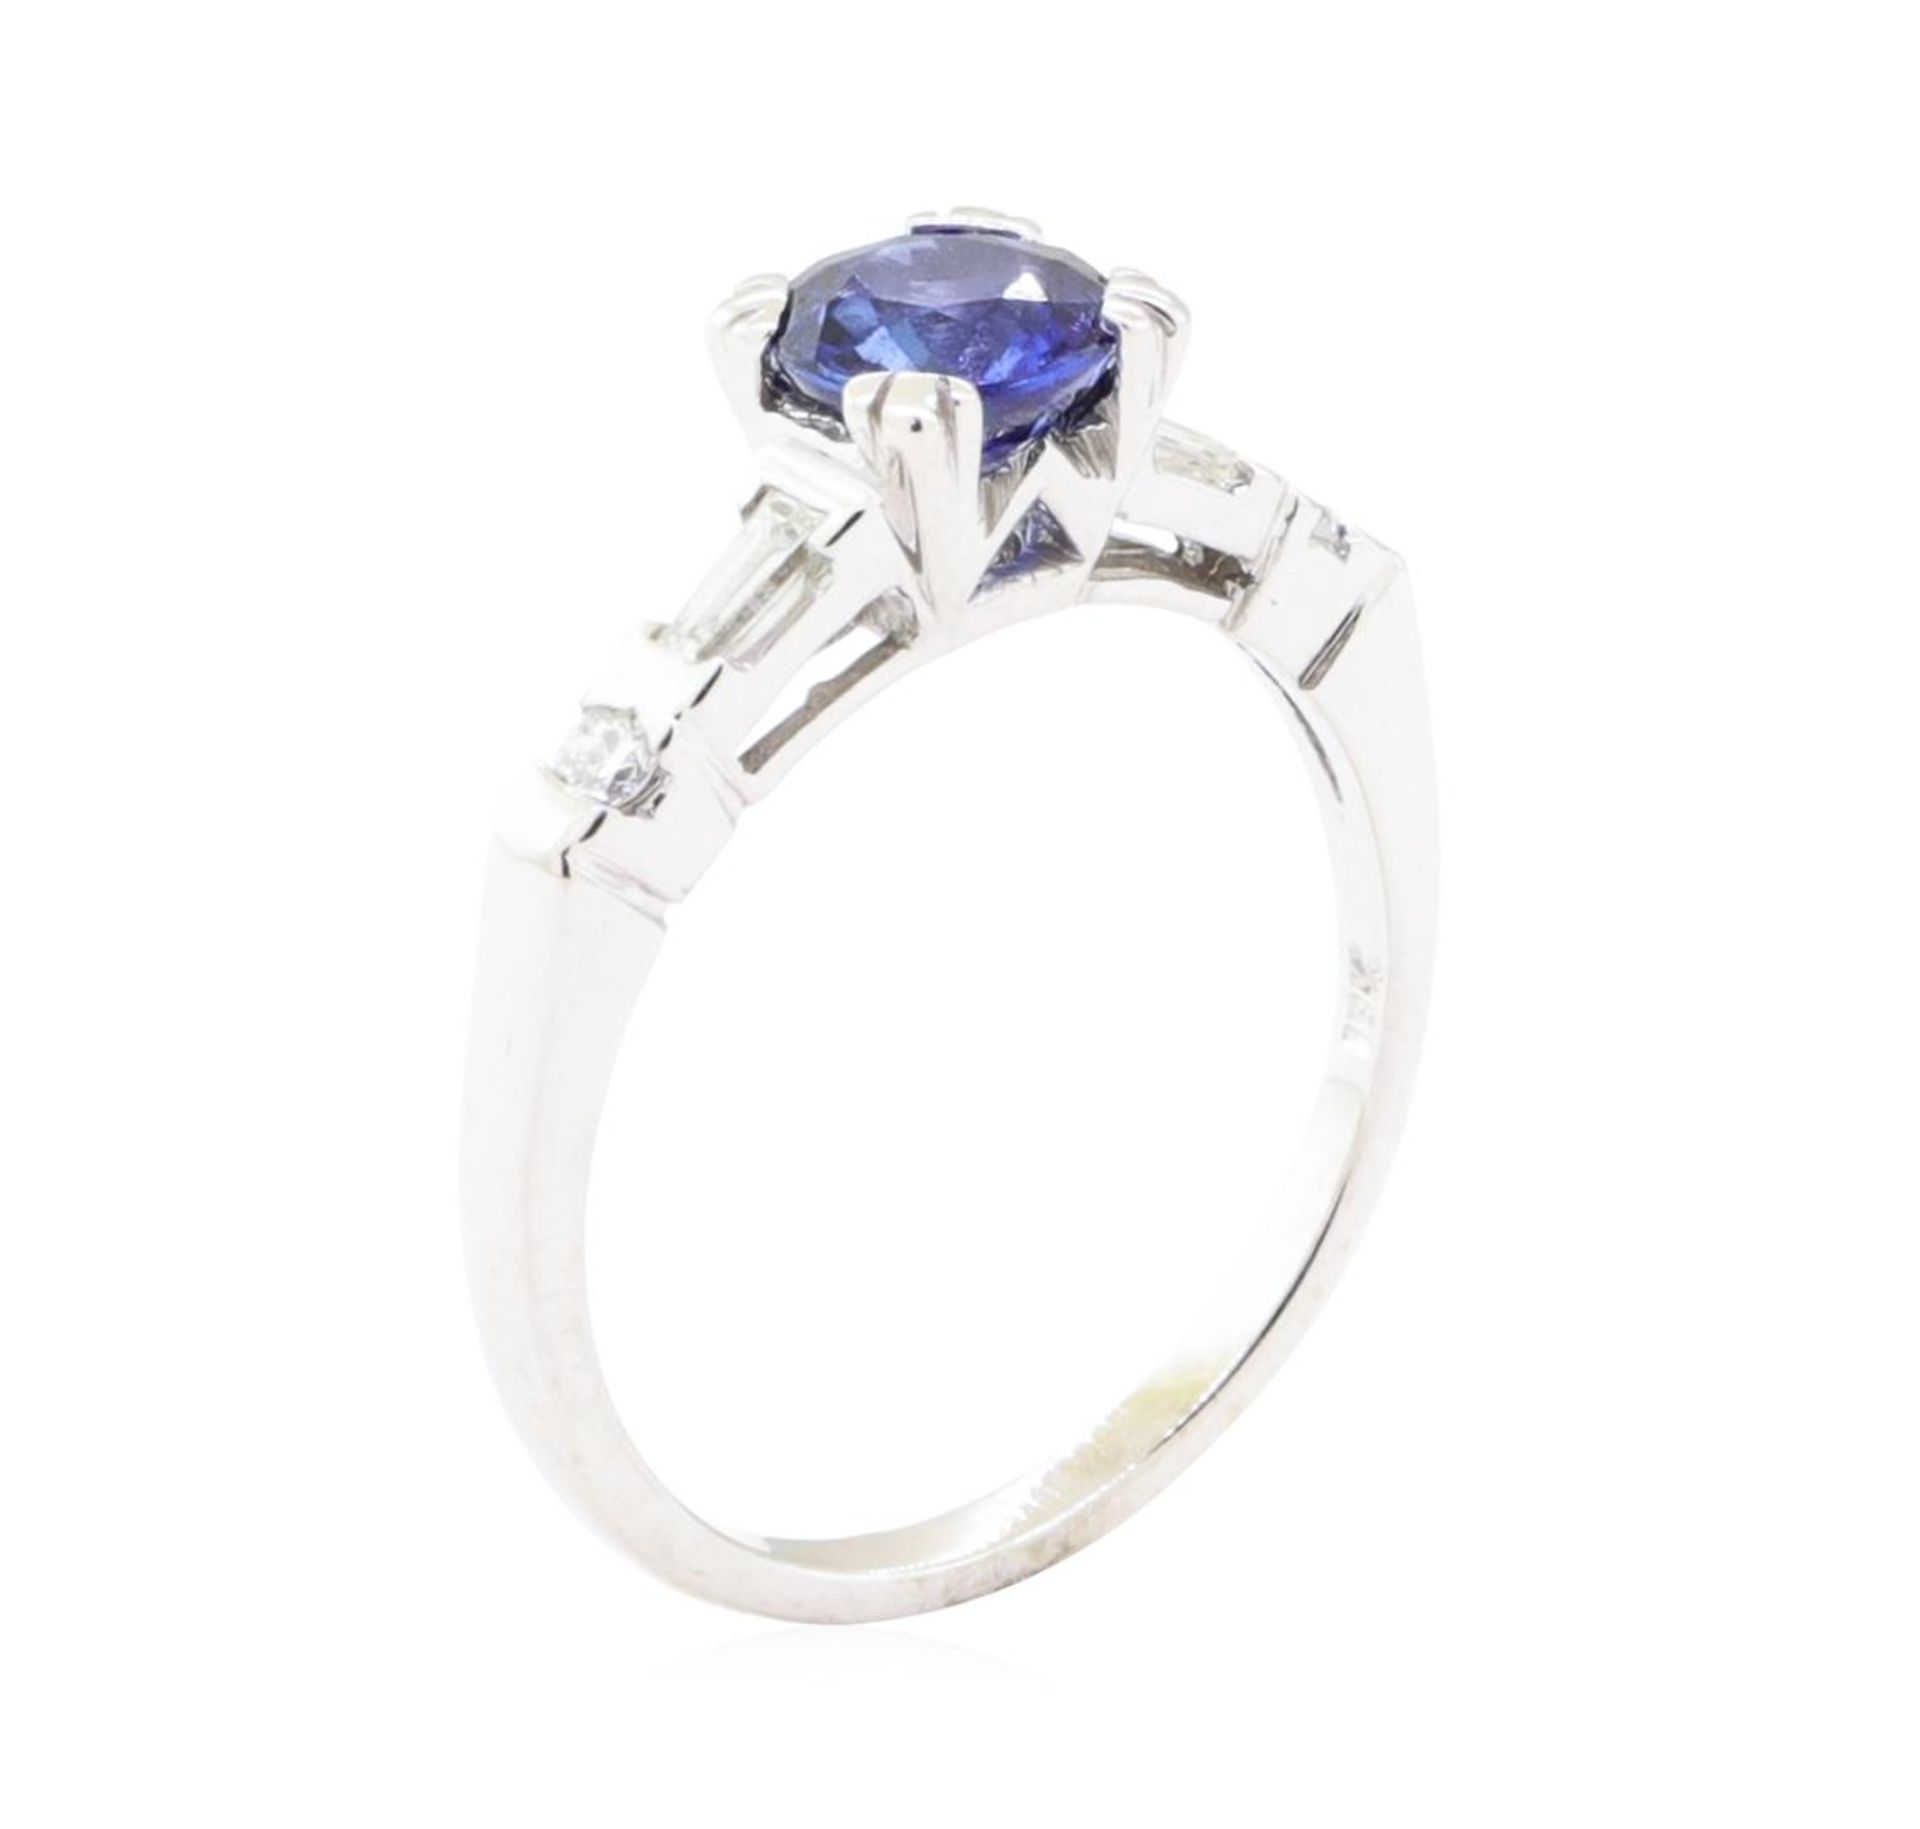 1.20 ctw Sapphire and Diamond Ring - 18KT White Gold - Image 4 of 4